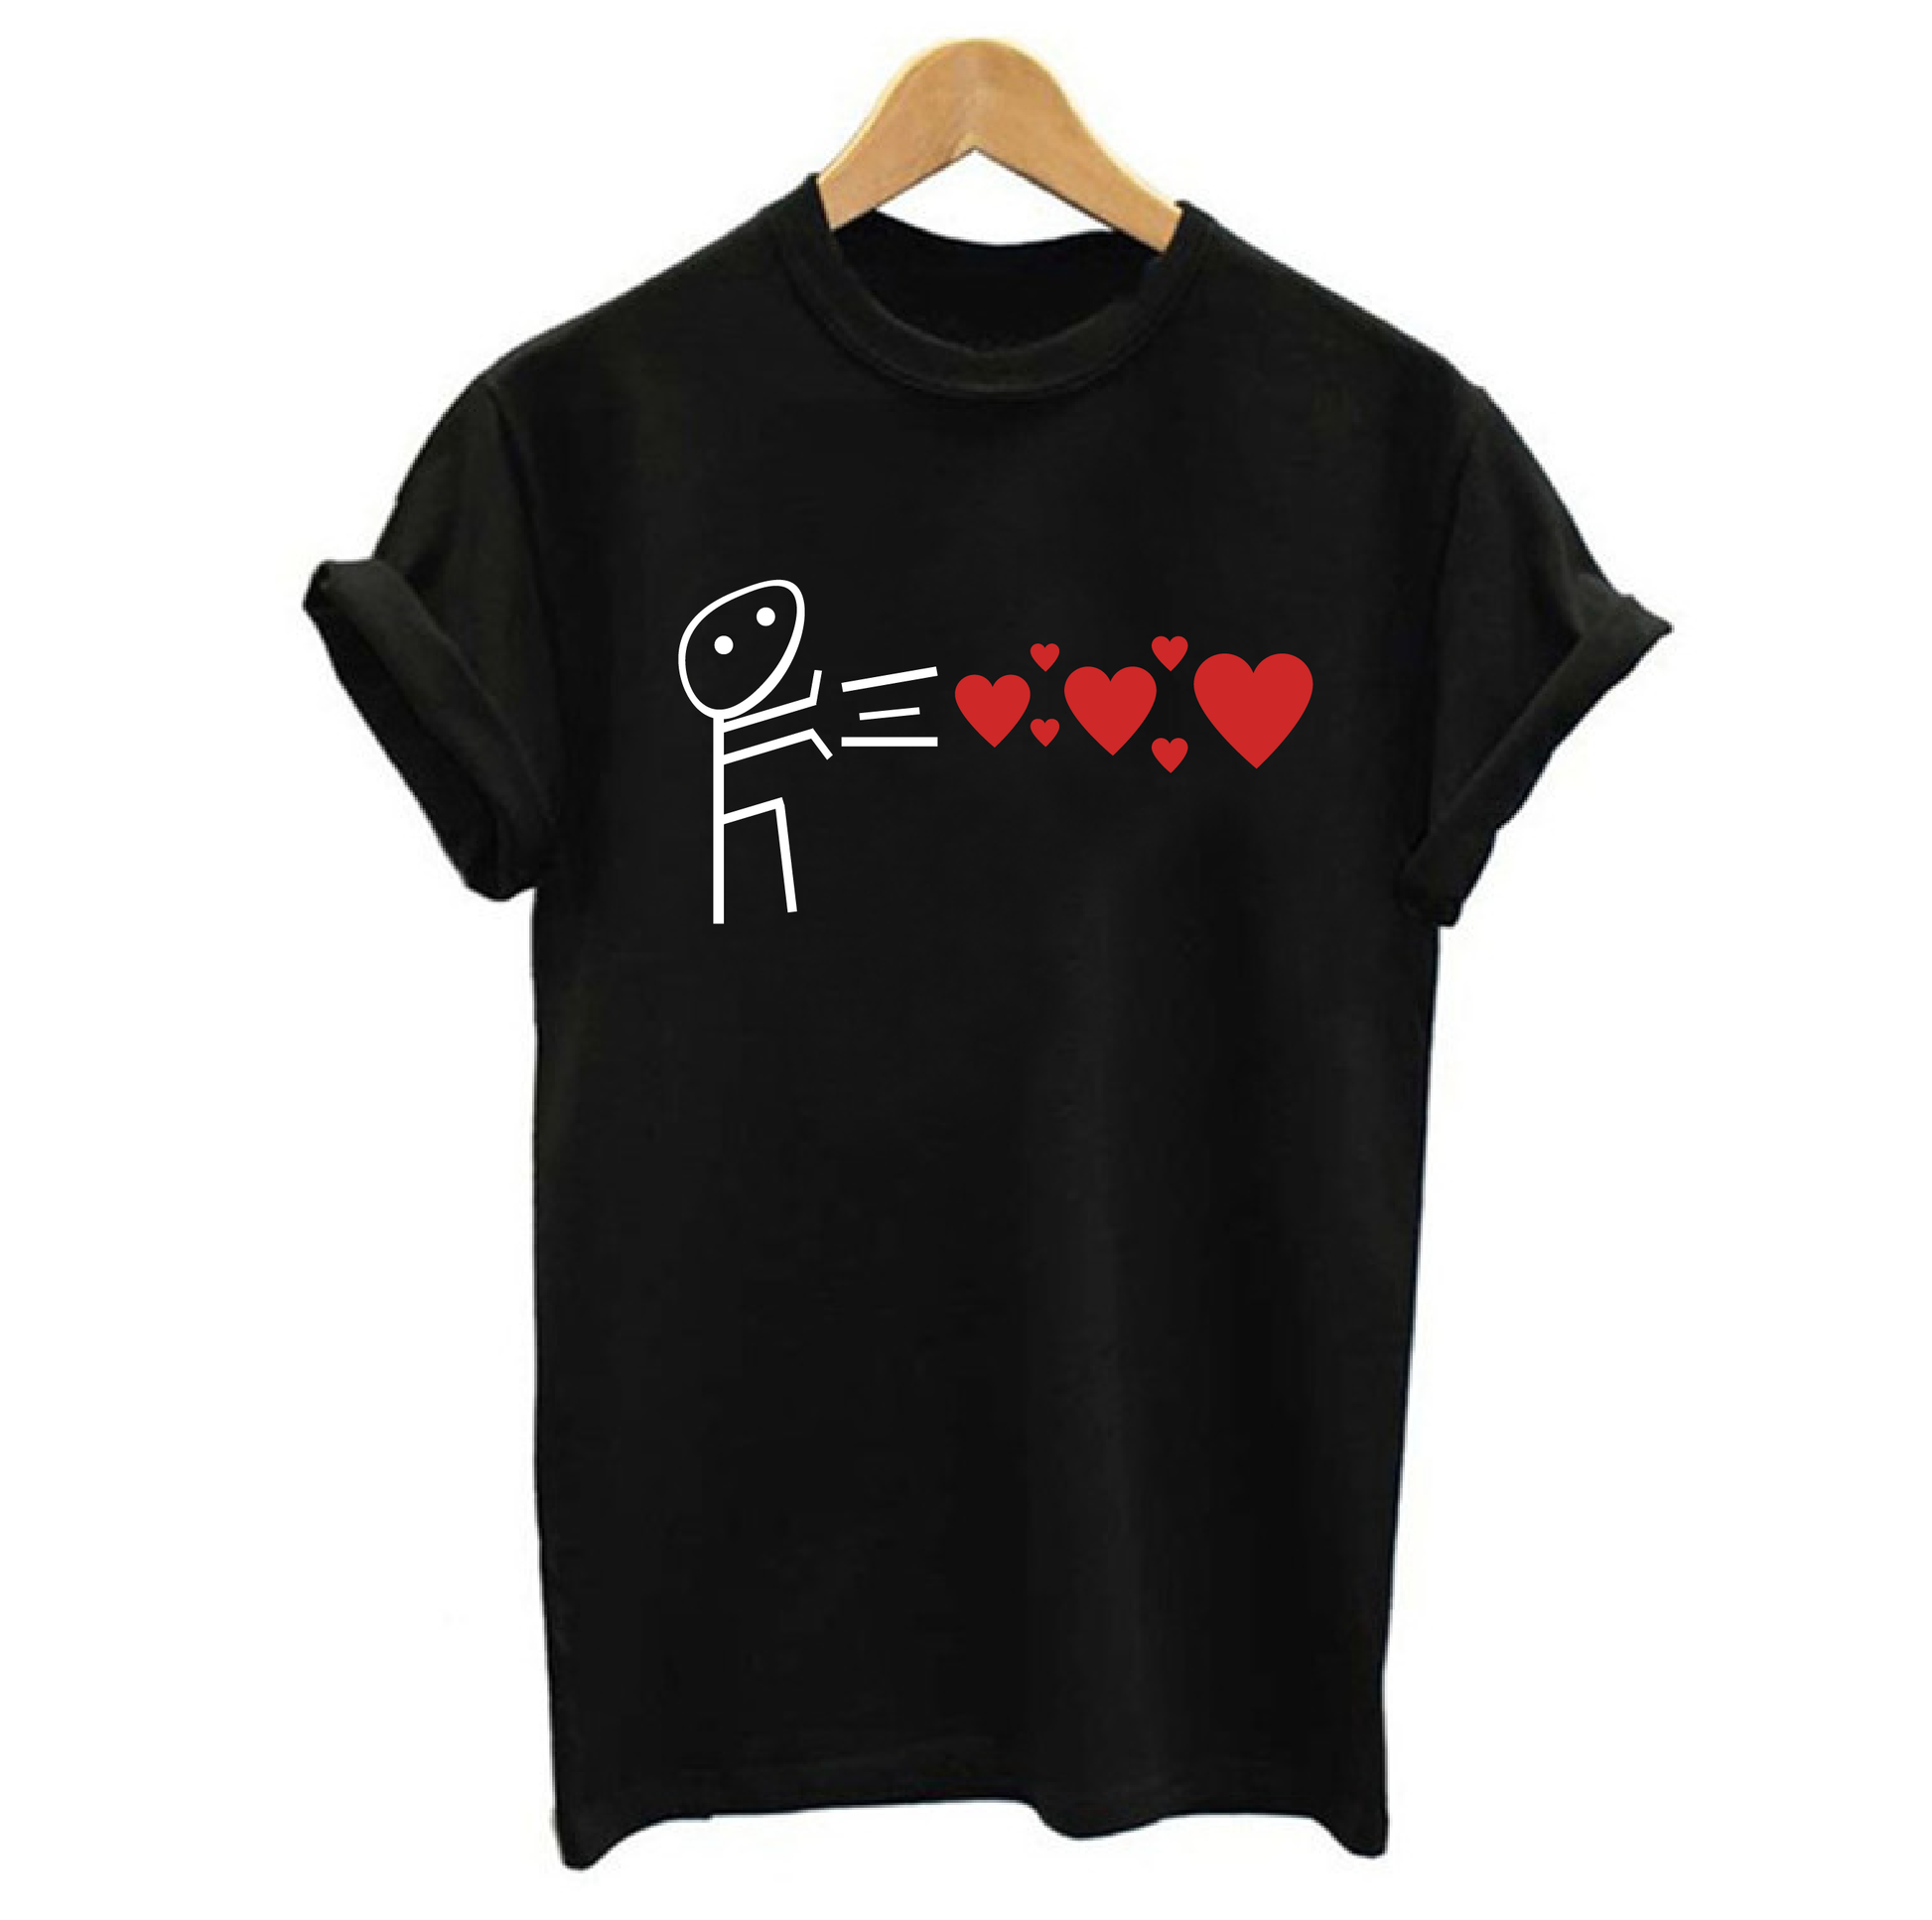 spread love not germs t-shirt